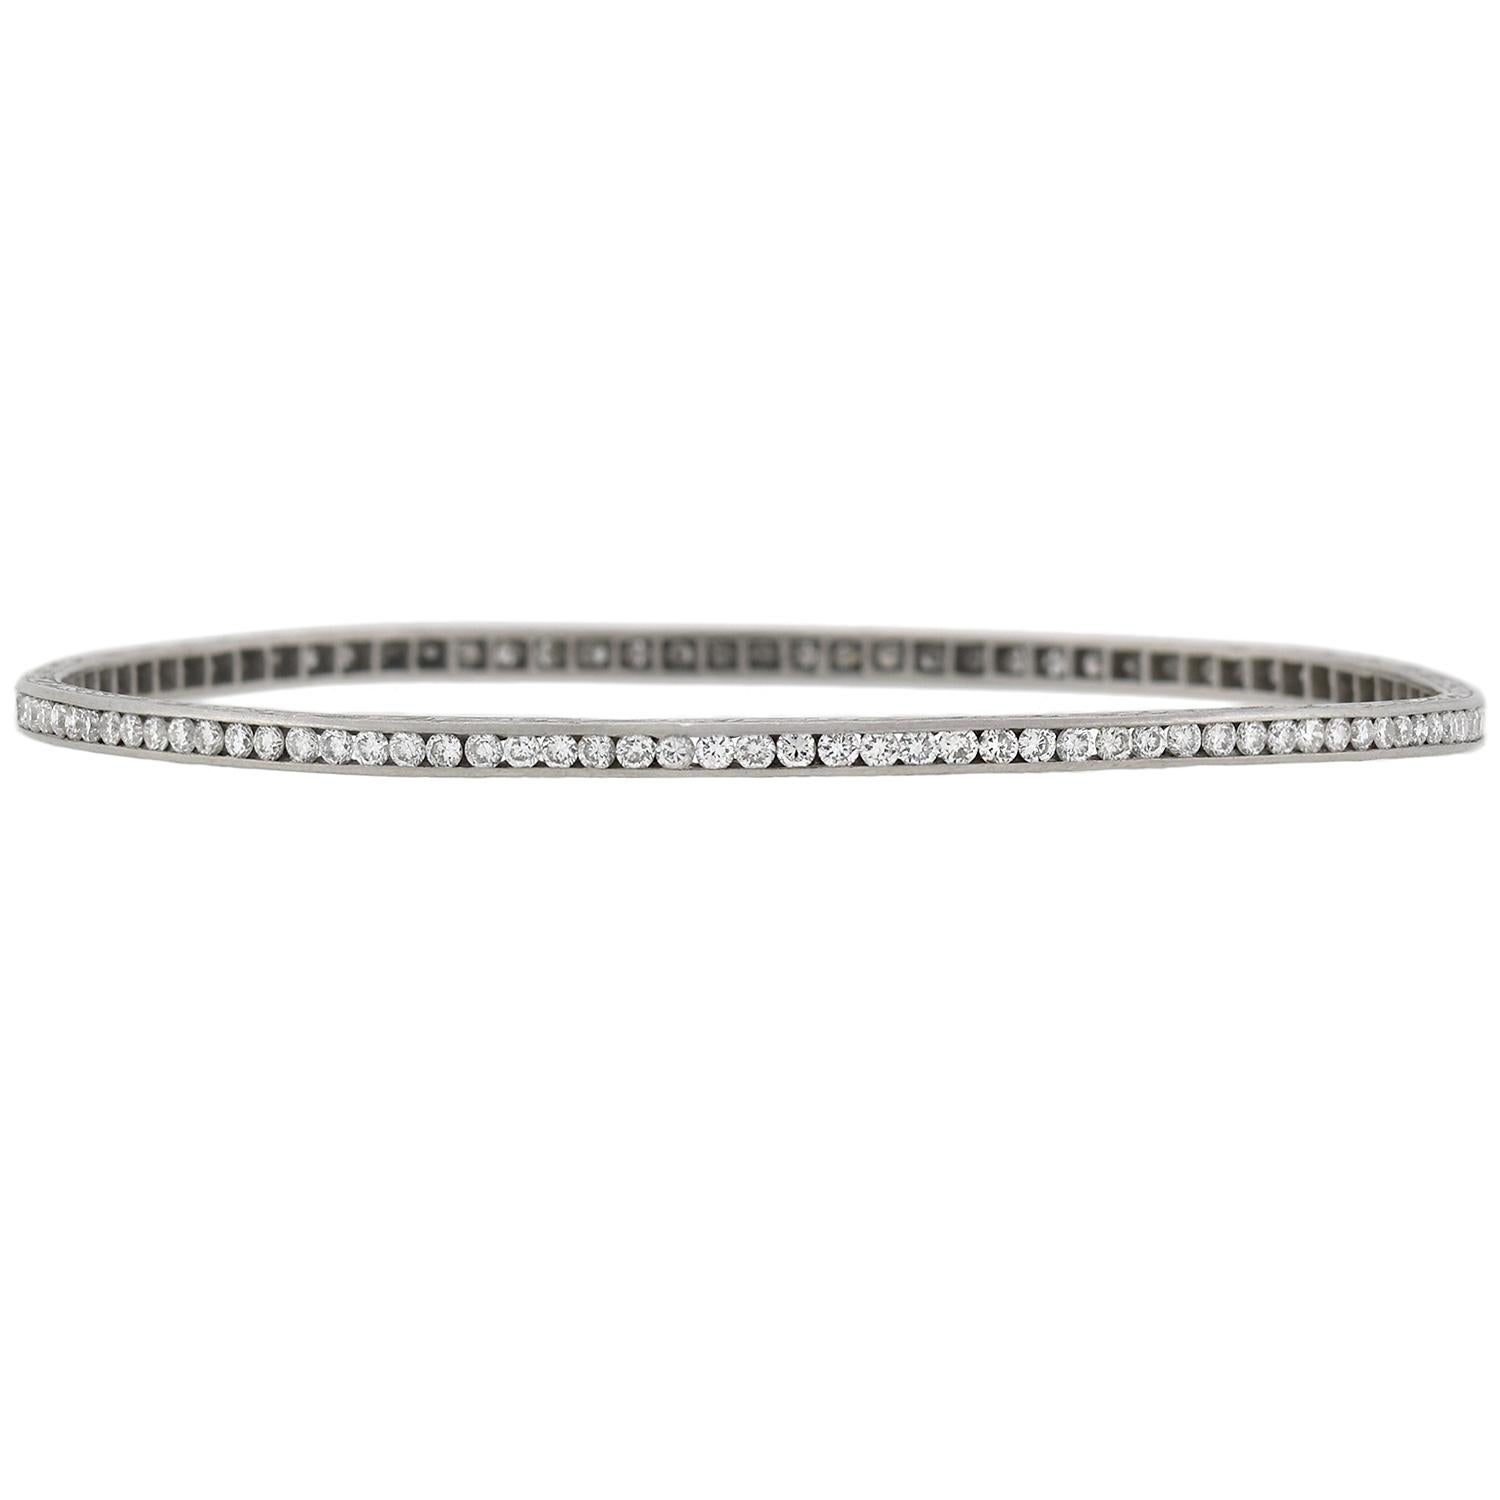 An absolutely stunning and unusual diamond bangle from the late Art Deco (ca1930s) era! This gorgeous oval-shaped bracelet is crafted in platinum and displays a sparkling surface lined with diamonds. With 90 stones in all, the old European Cut